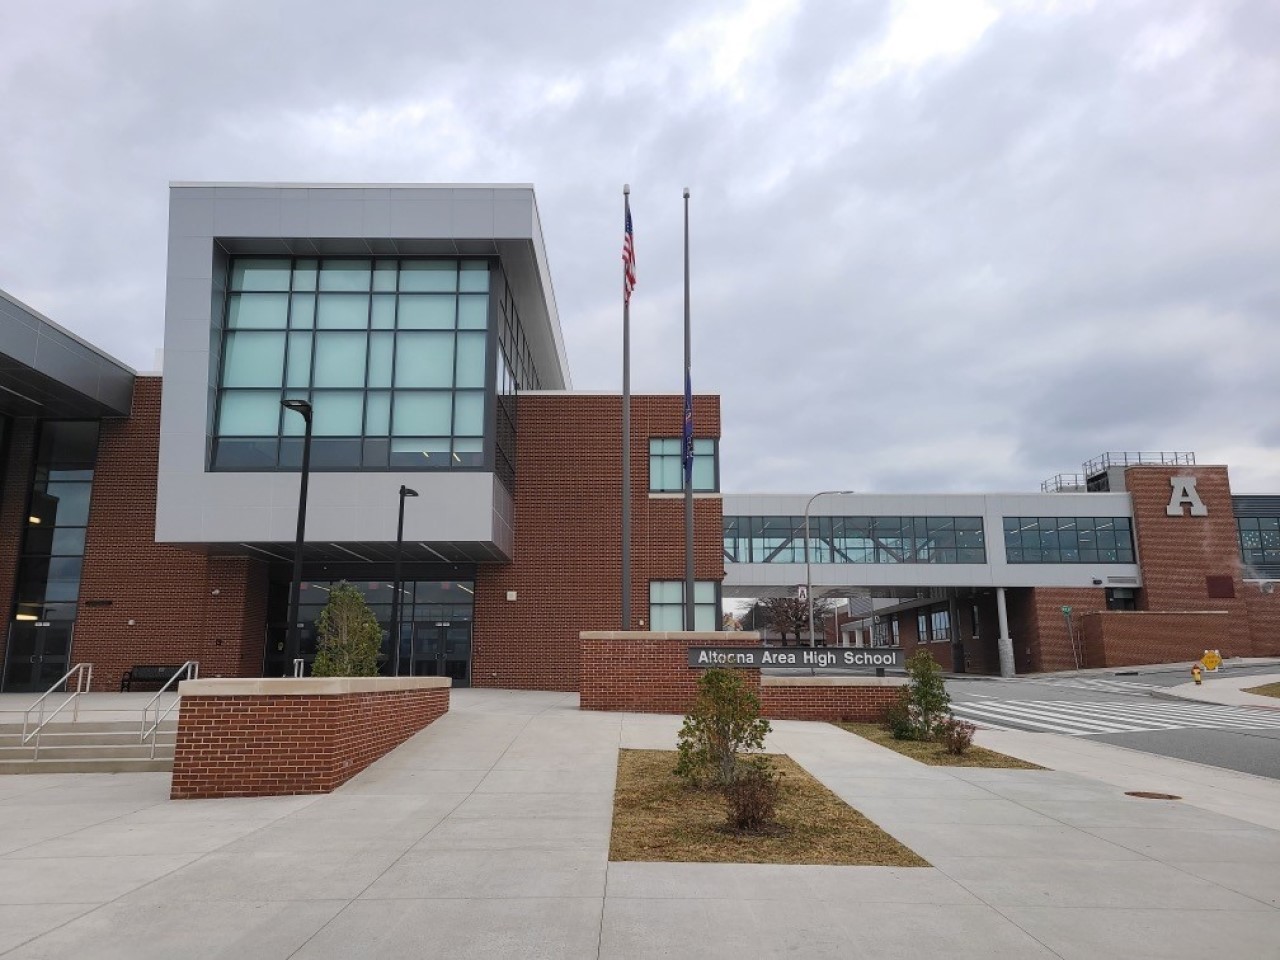 Resource officers at the Altoona Area High School, and other schools throughout the district, may soon be able to carry AR-15 semi-automatic patrol rifles, if the school board passes a policy change at its Jan.17, 2023 meeting.